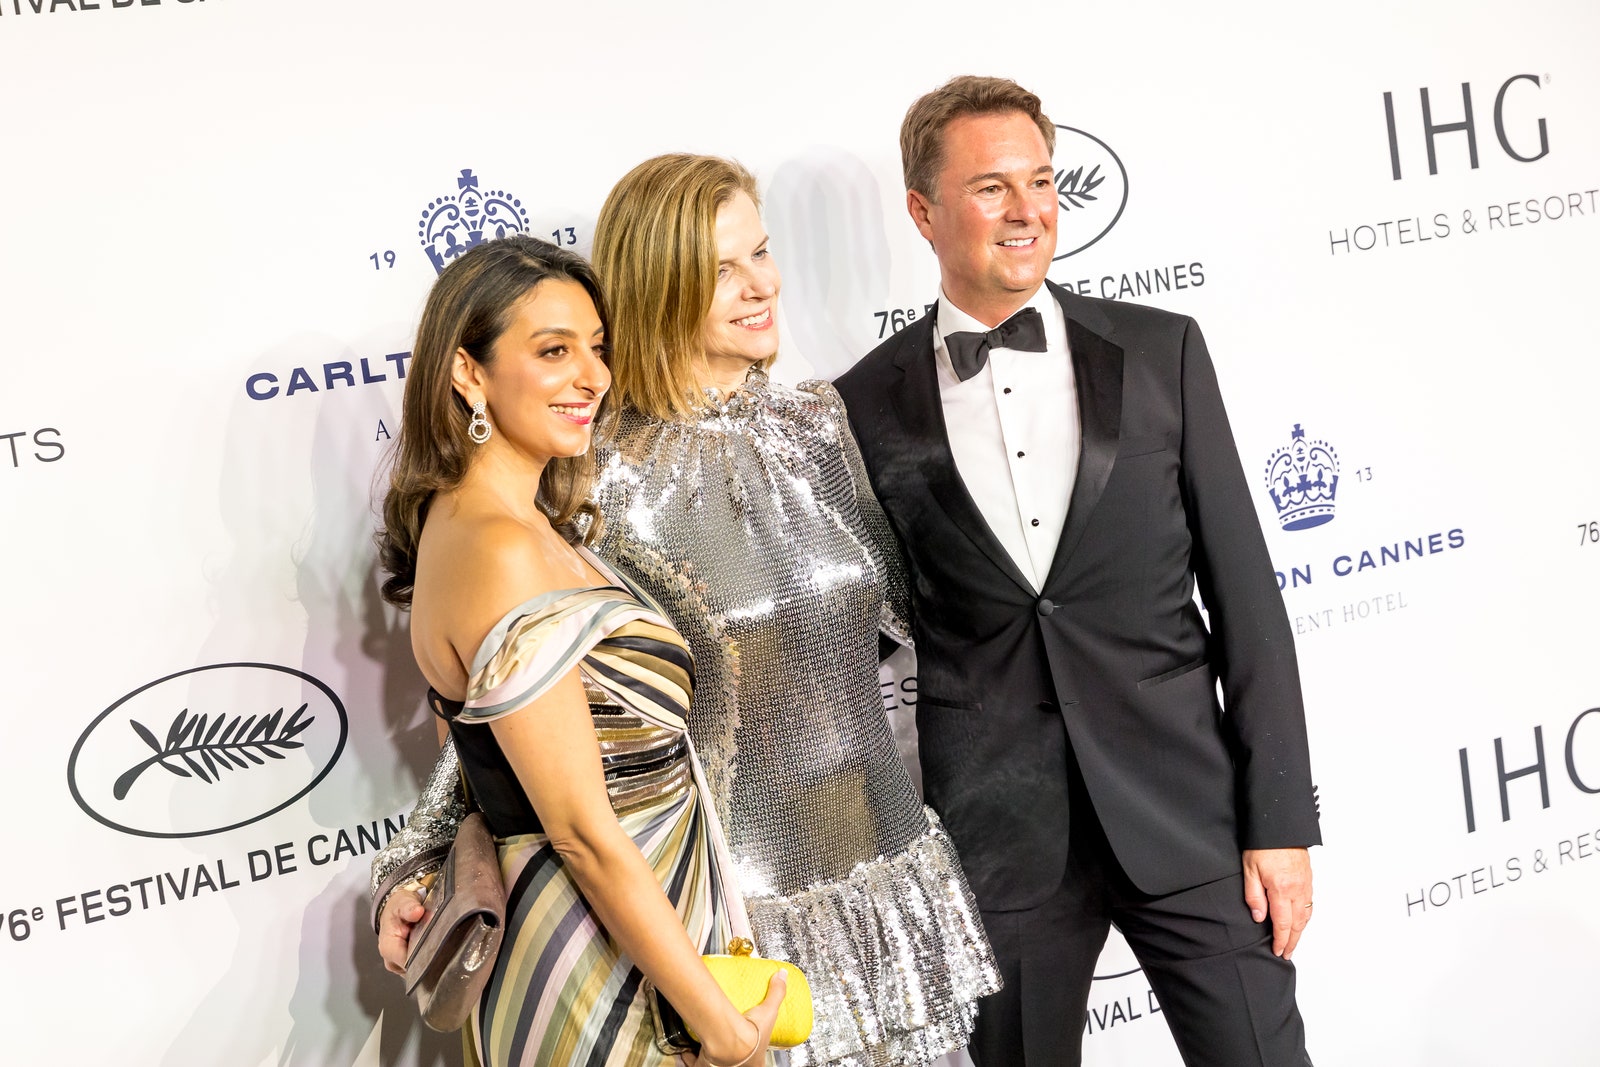 A Night at Carlton Cannes, a Regent Hotel: Inside the Hottest Party at the Cannes Film Festival